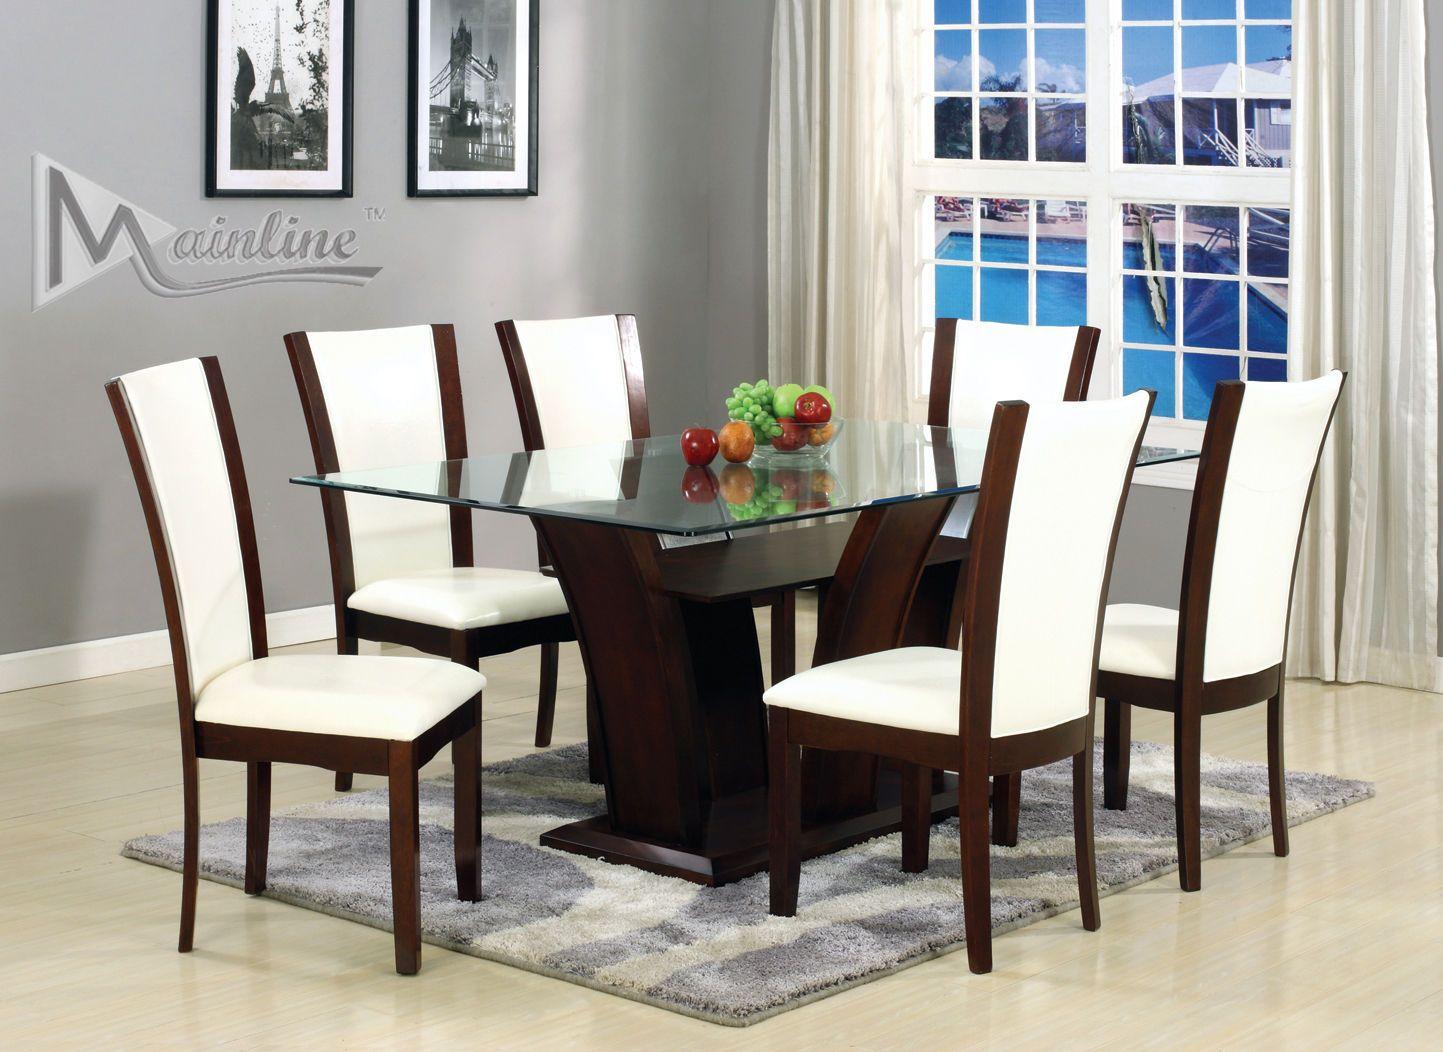 Mainline Table and four chairs in white,Store Brand